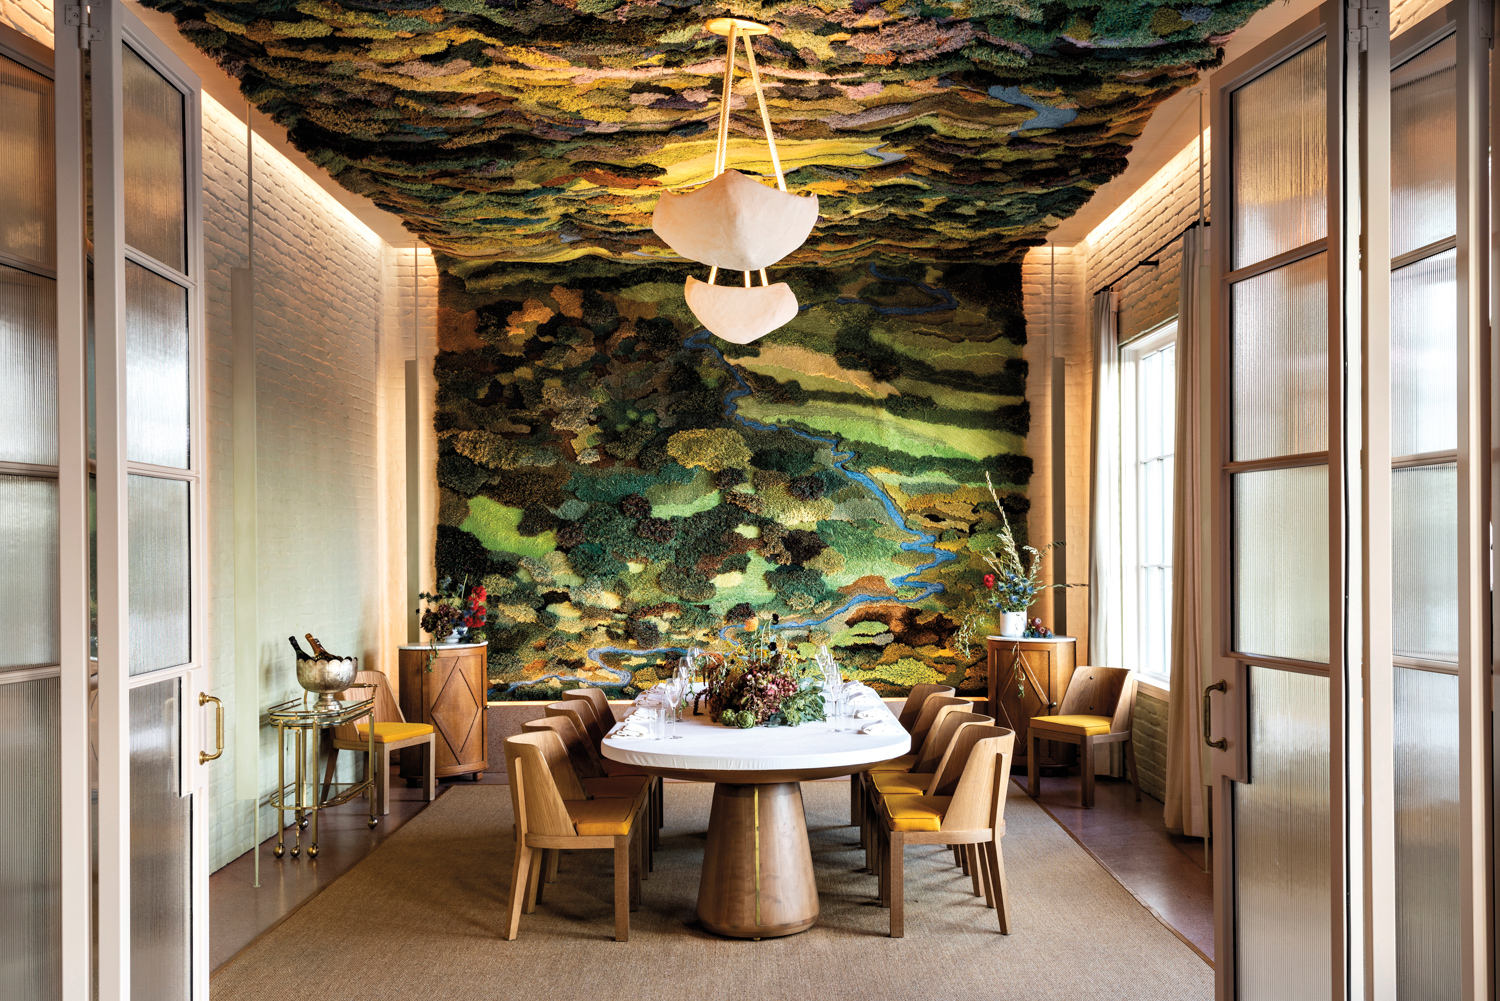 Pendant lights hang from a textile landscape artwork on the ceiling at March restaurant in Houston